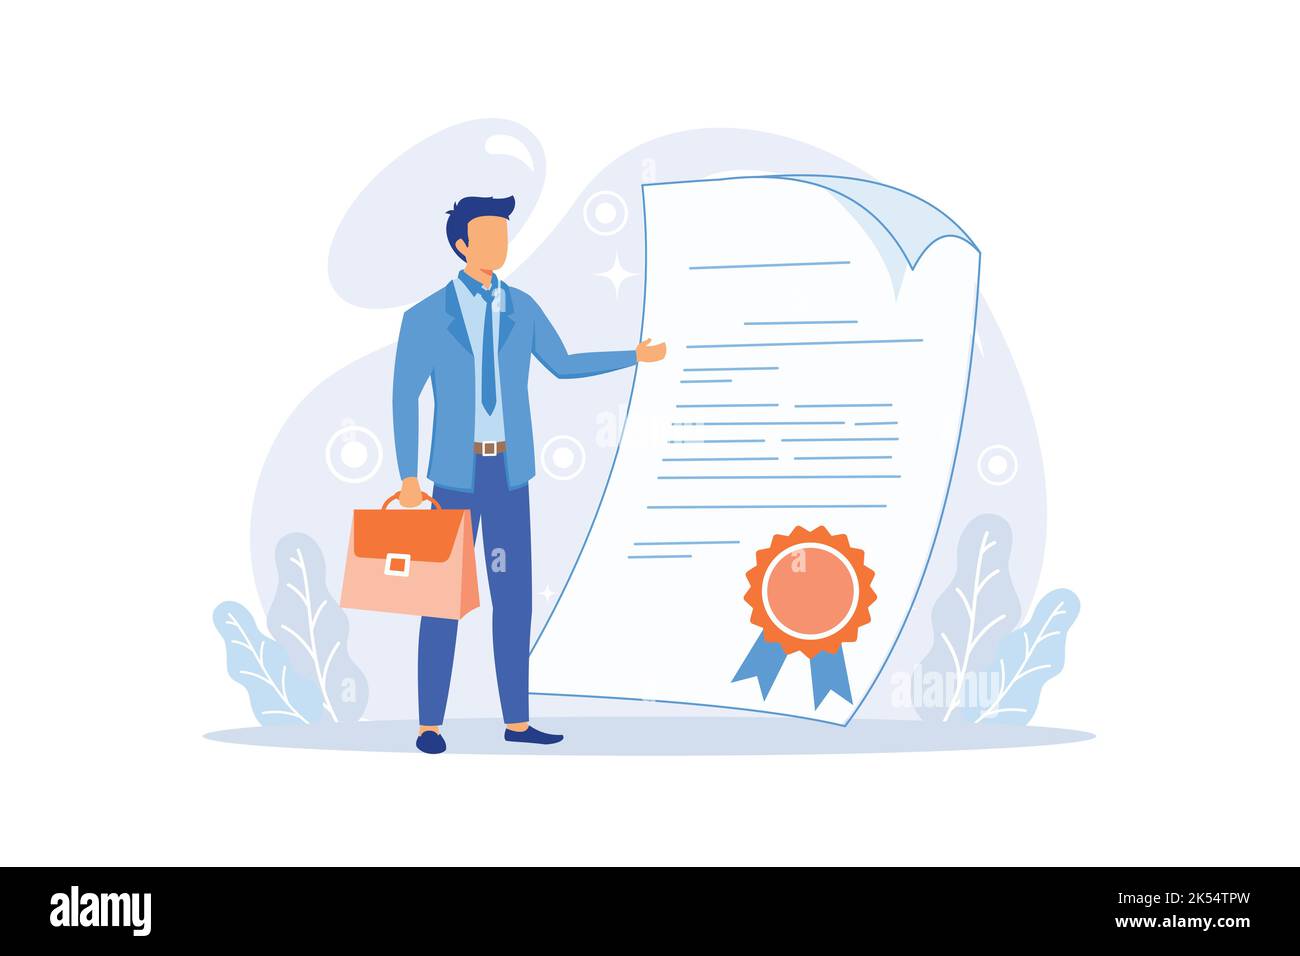 Characters Get Notary Professional Service. People Visit Lawyer Office for Signing Legal Documents. Tiny Secretary with Huge Pen Sign Documentation. Stock Vector